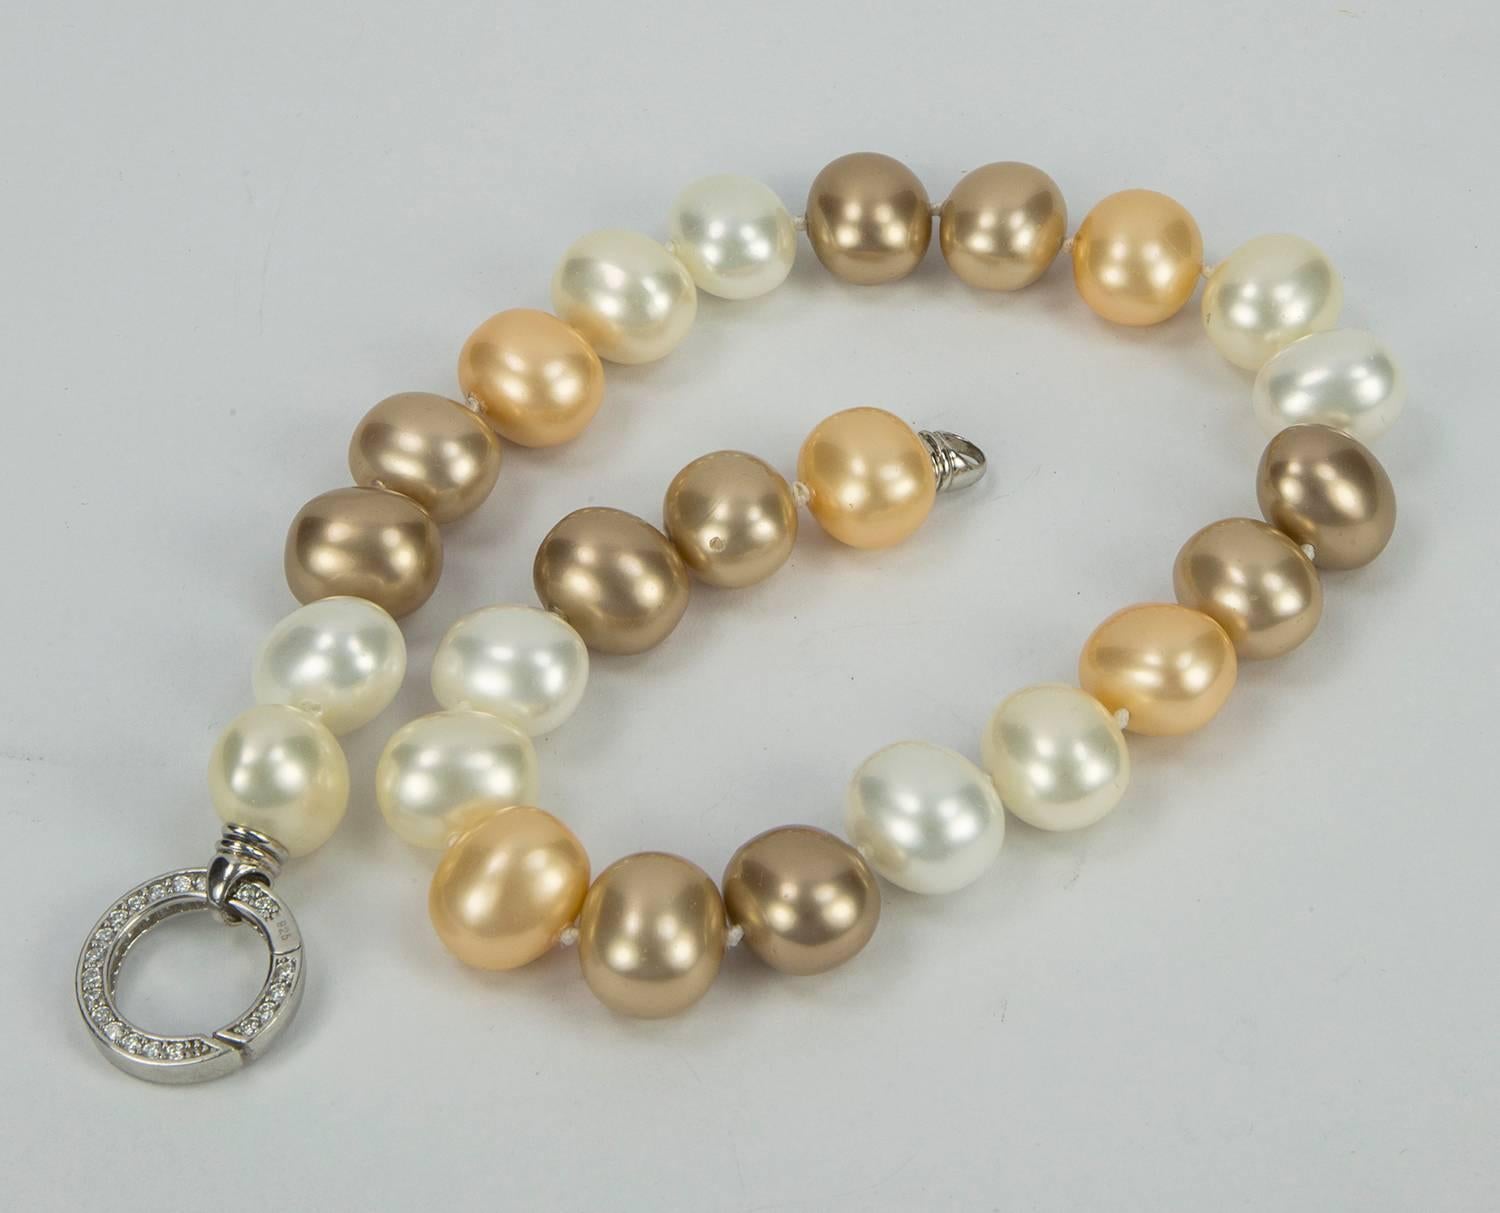 Stunning Lustrous White, Gold and Bronze semi-round Faux Pearl Statement Necklace; Each Luscious Pearl measuring approx 18.5mm x 16mm; hand knotted with matching color silk thread; held by a round CZ encrusted clasp; approx 18.5” long. Chic and